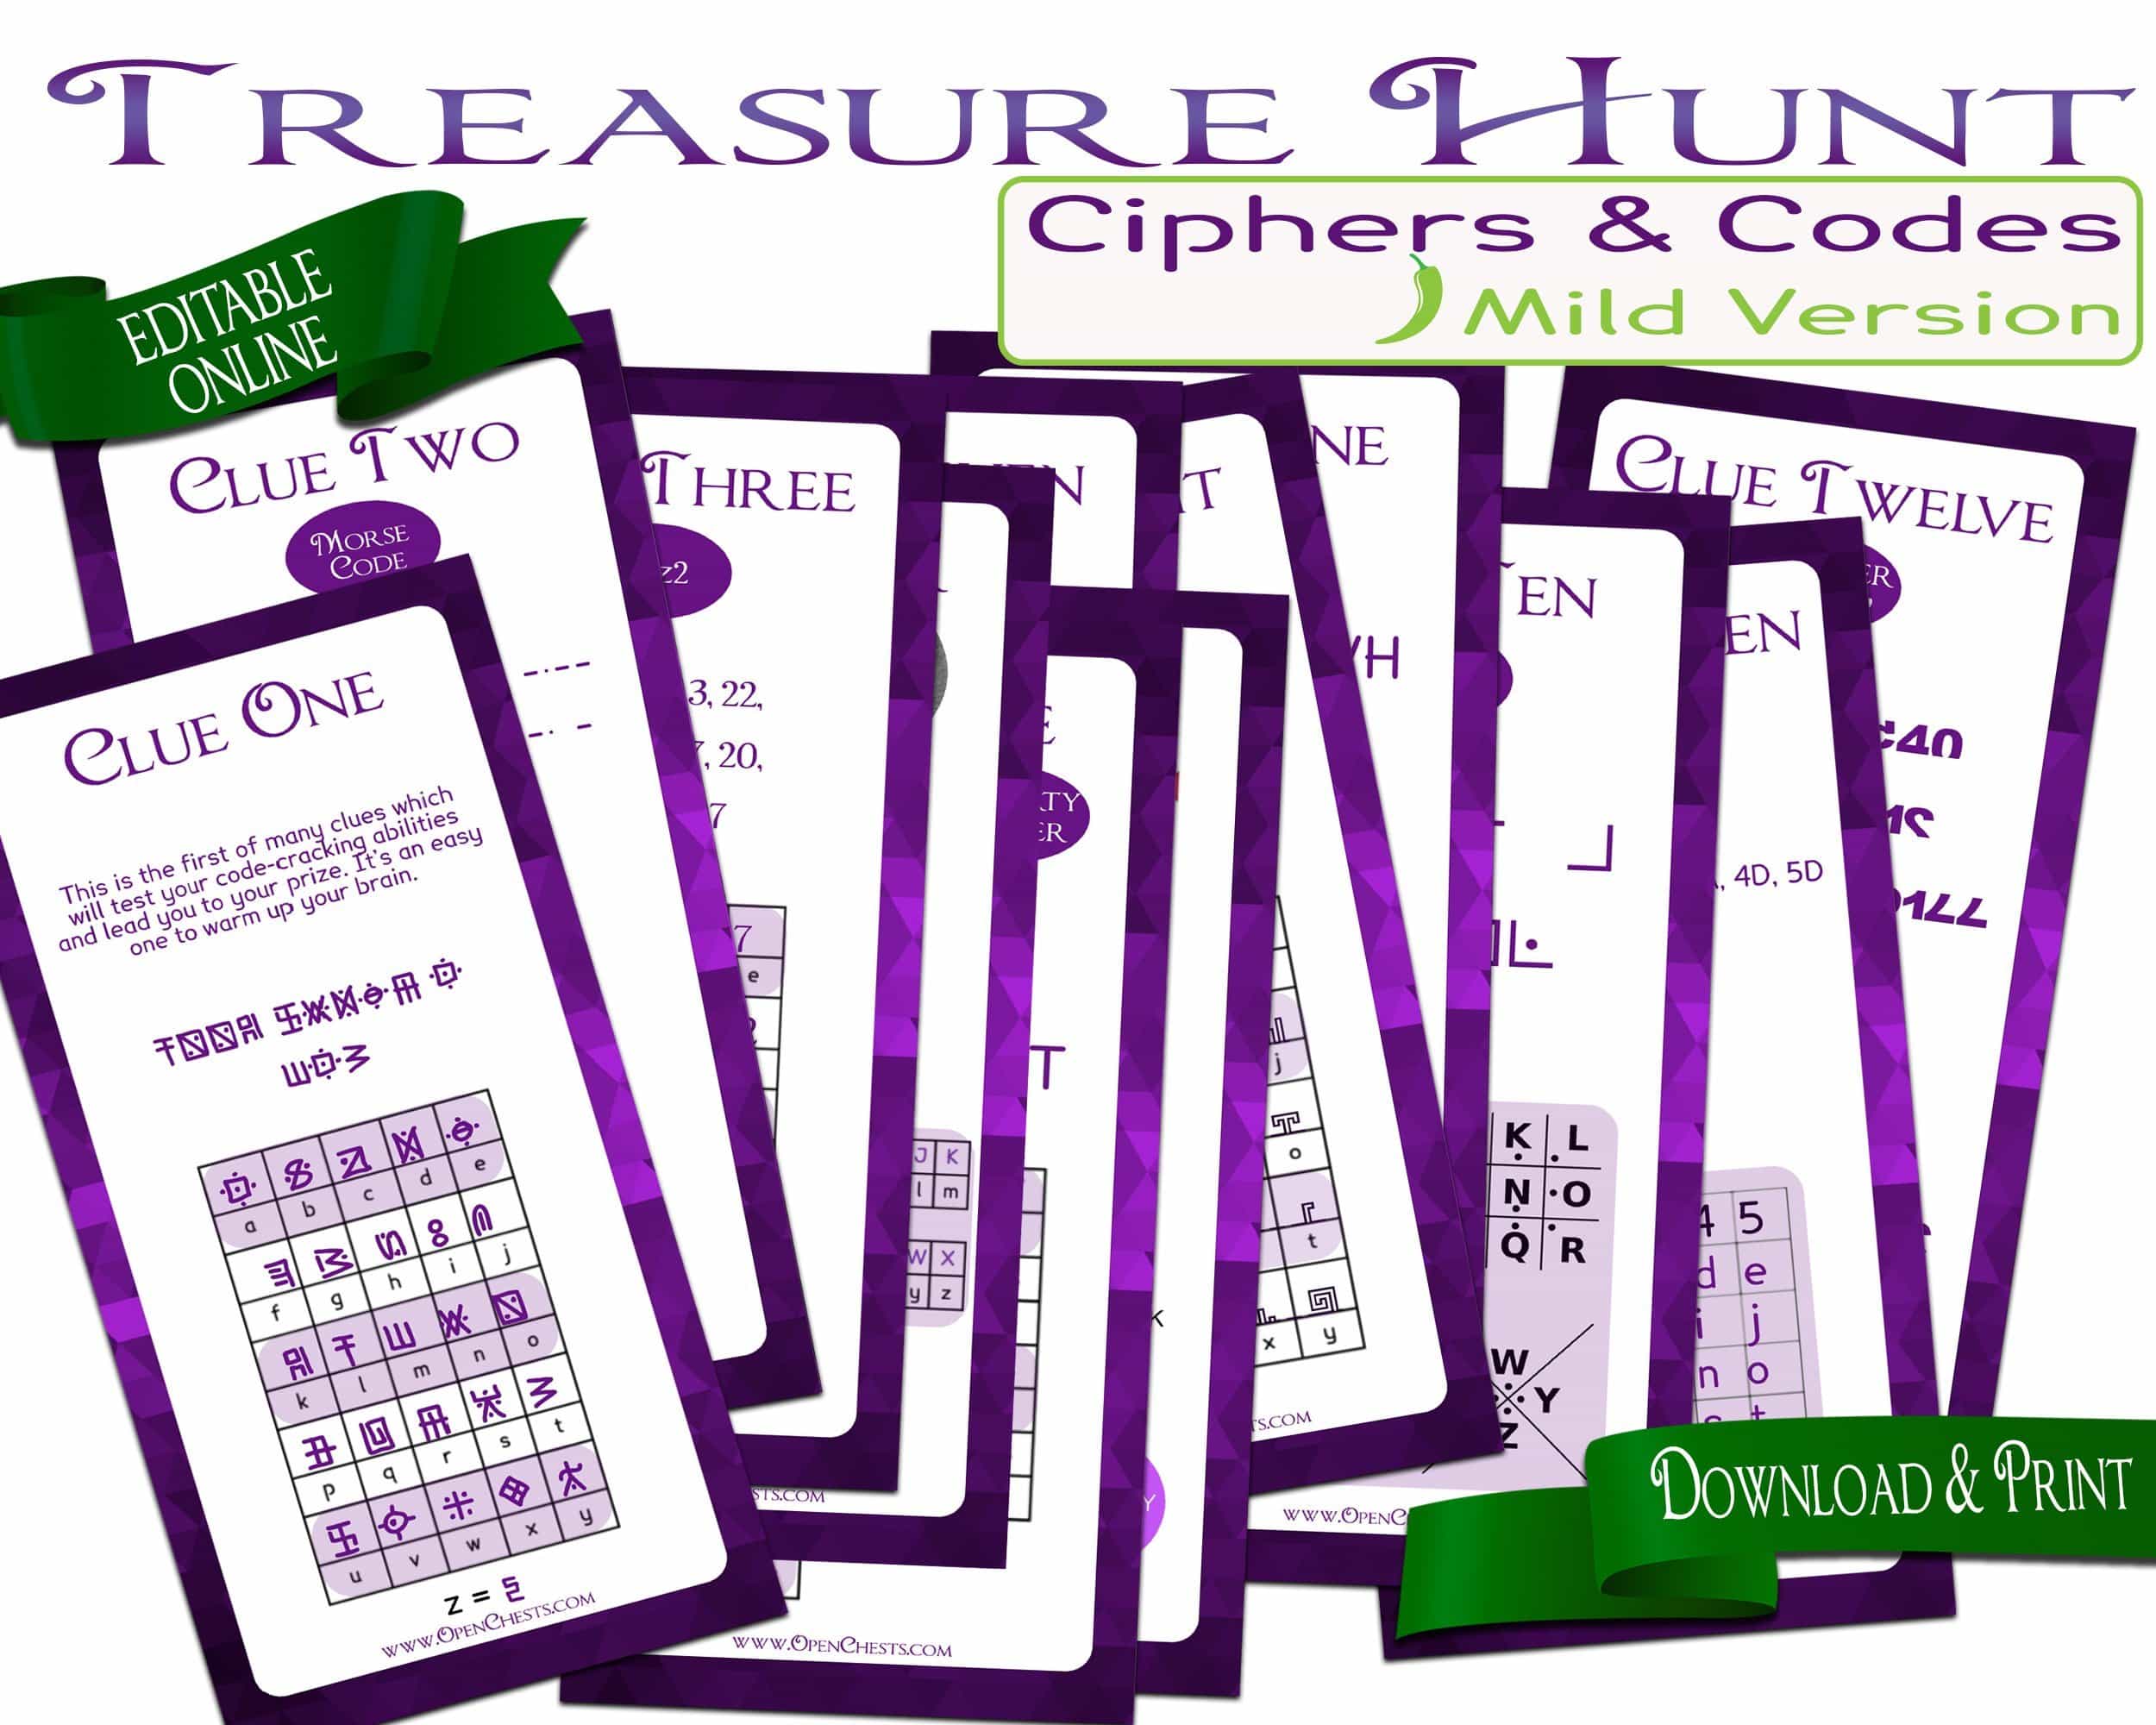 Challenging Treasure Hunt Clues - Codes & Ciphers - Open Chests